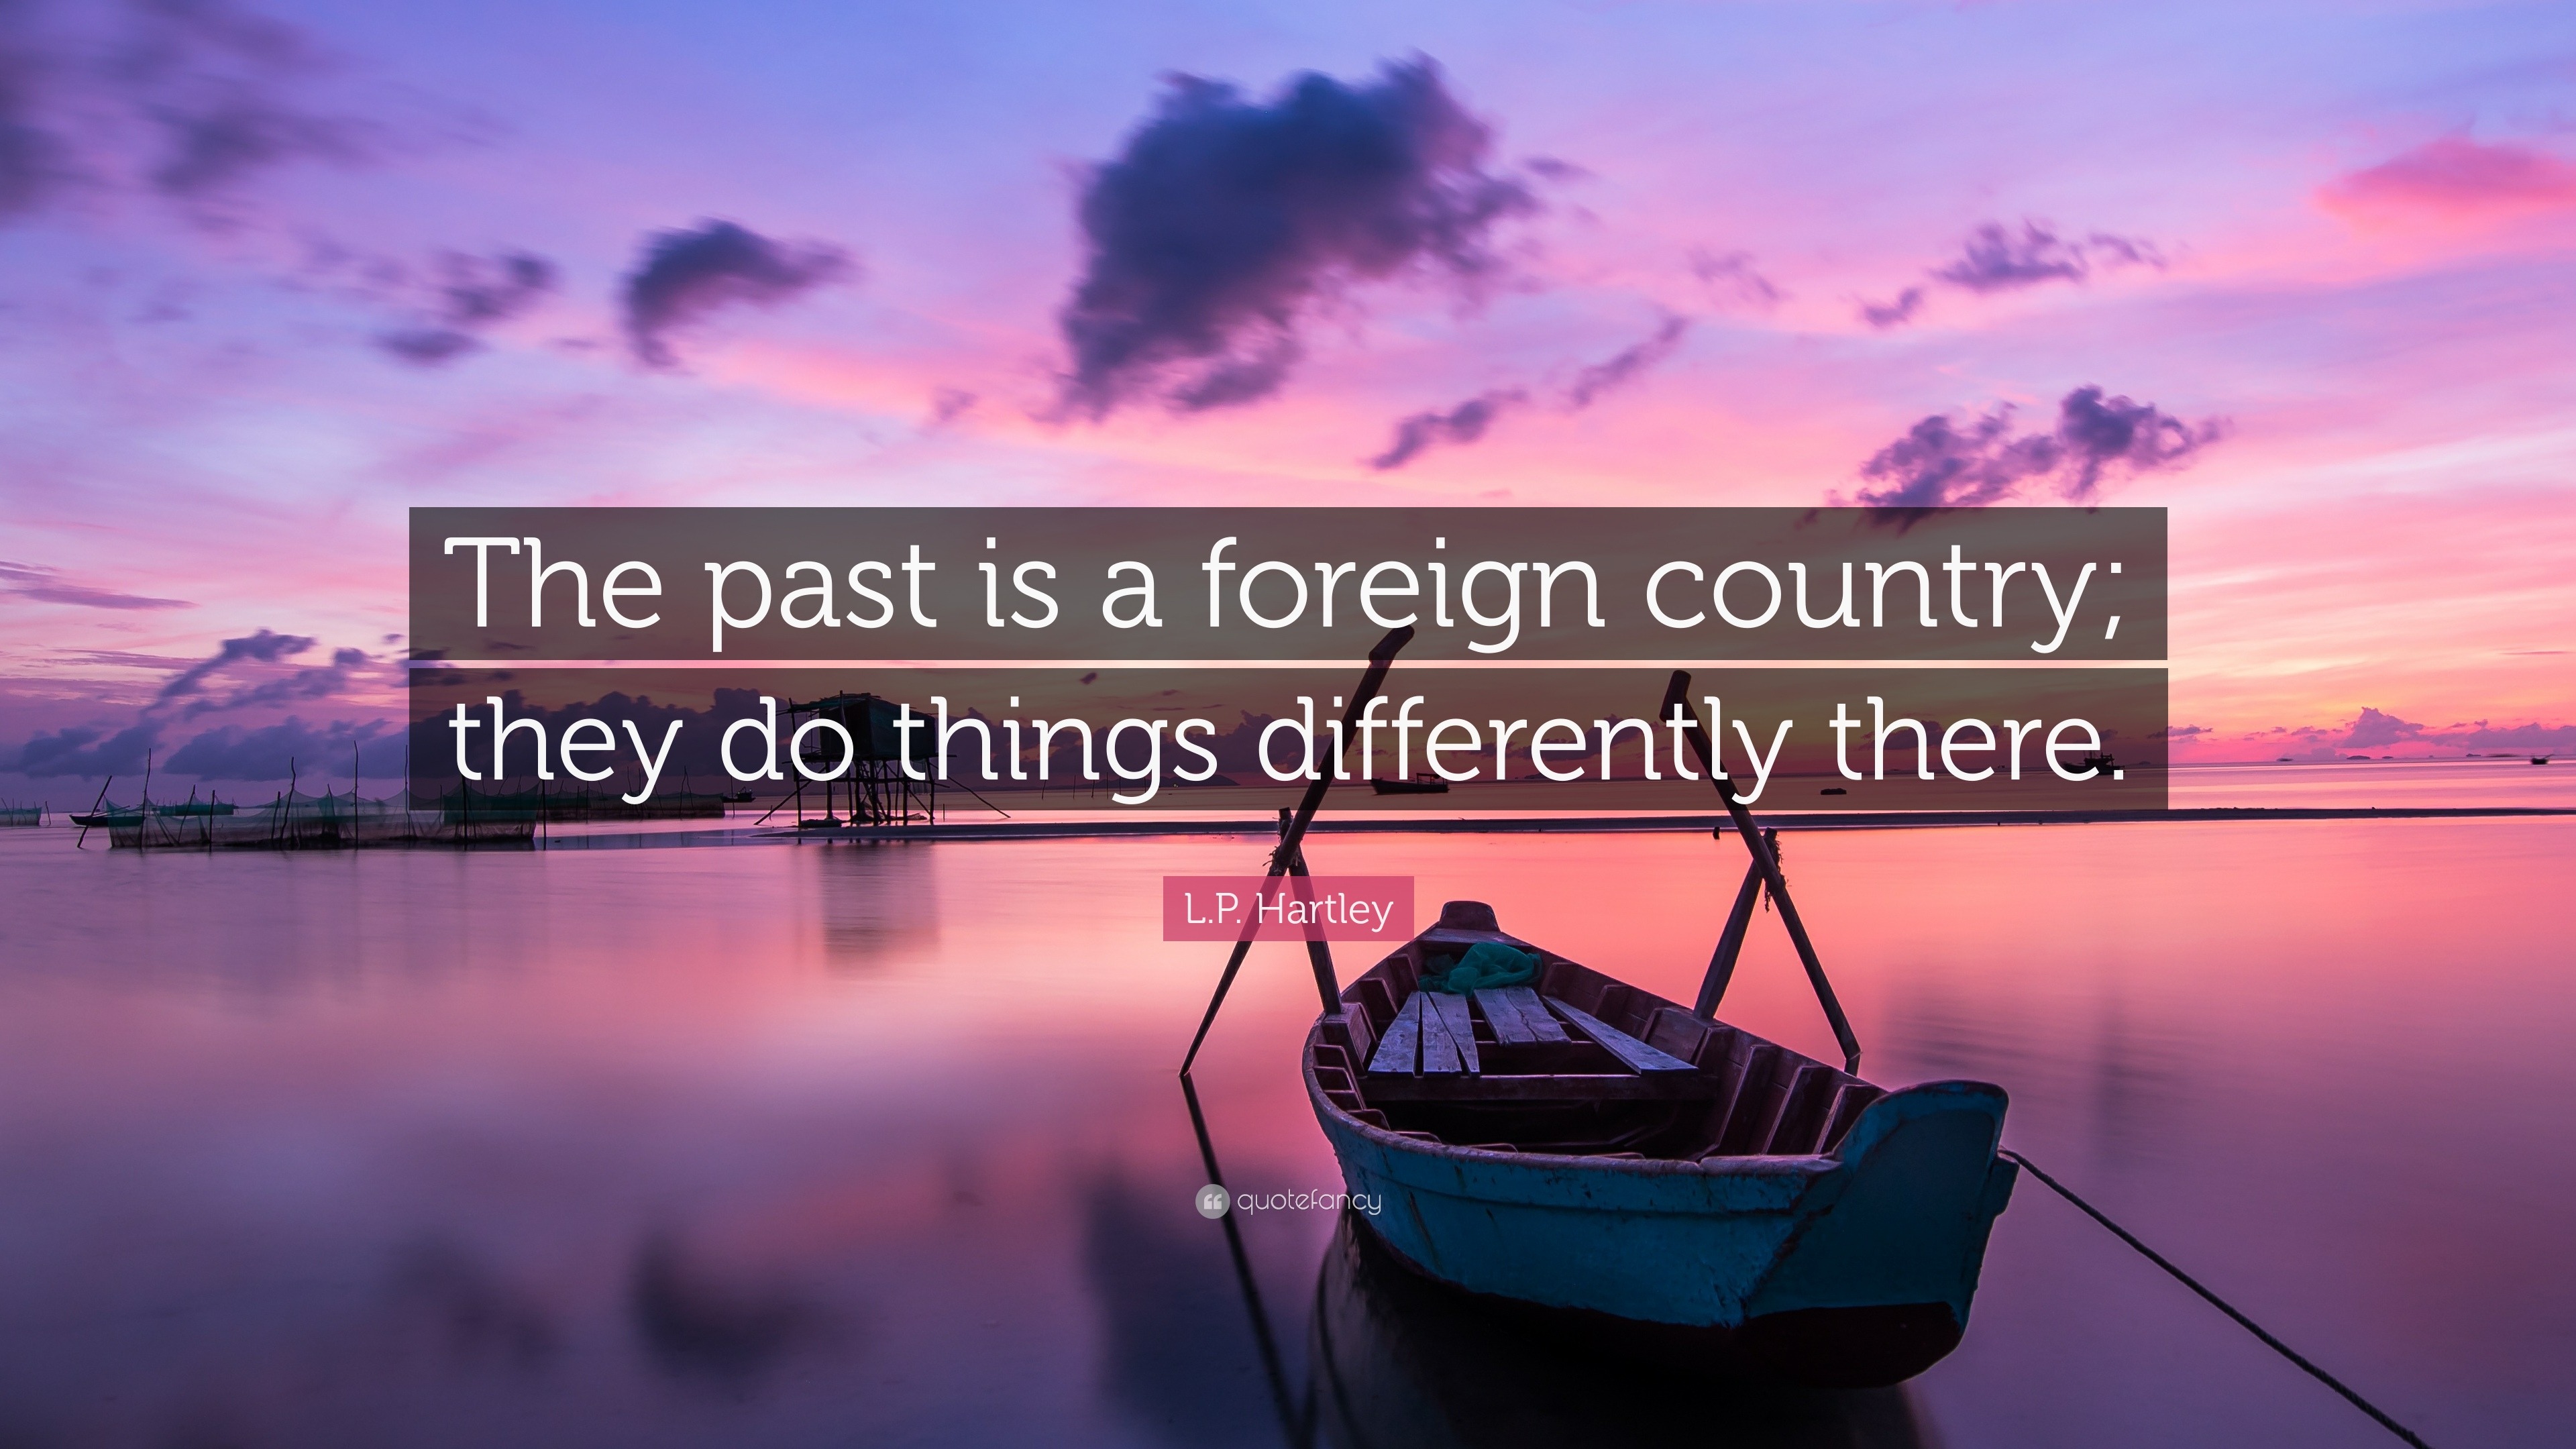 L.p. Hartley Quote: “The Past Is A Foreign Country; They Do Things Differently There.”